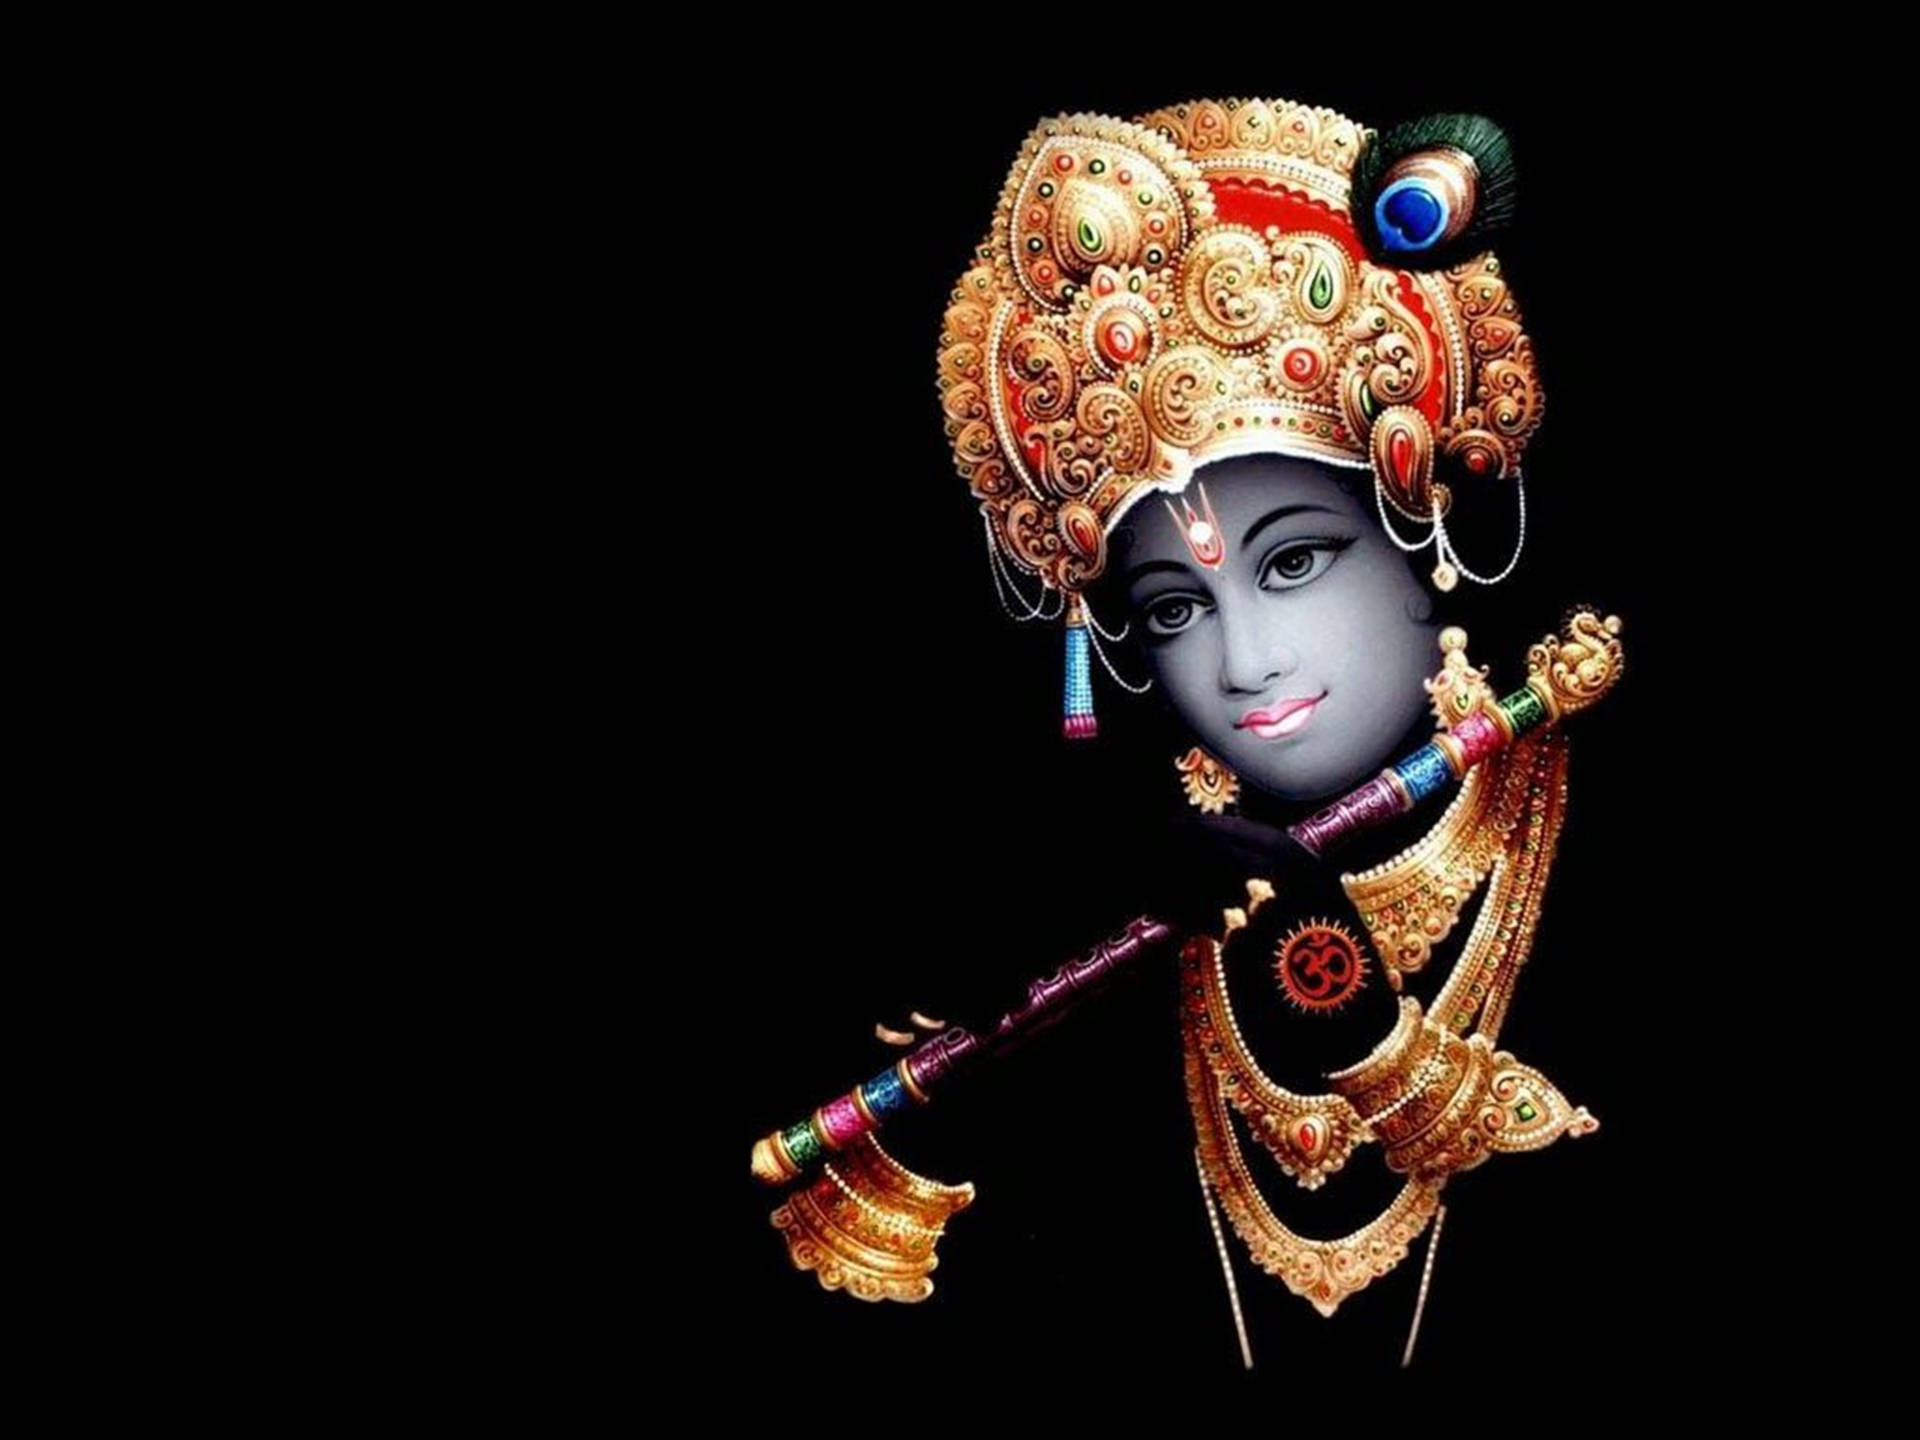 Lord Krishna Photos Download The BEST Free Lord Krishna Stock Photos  HD  Images